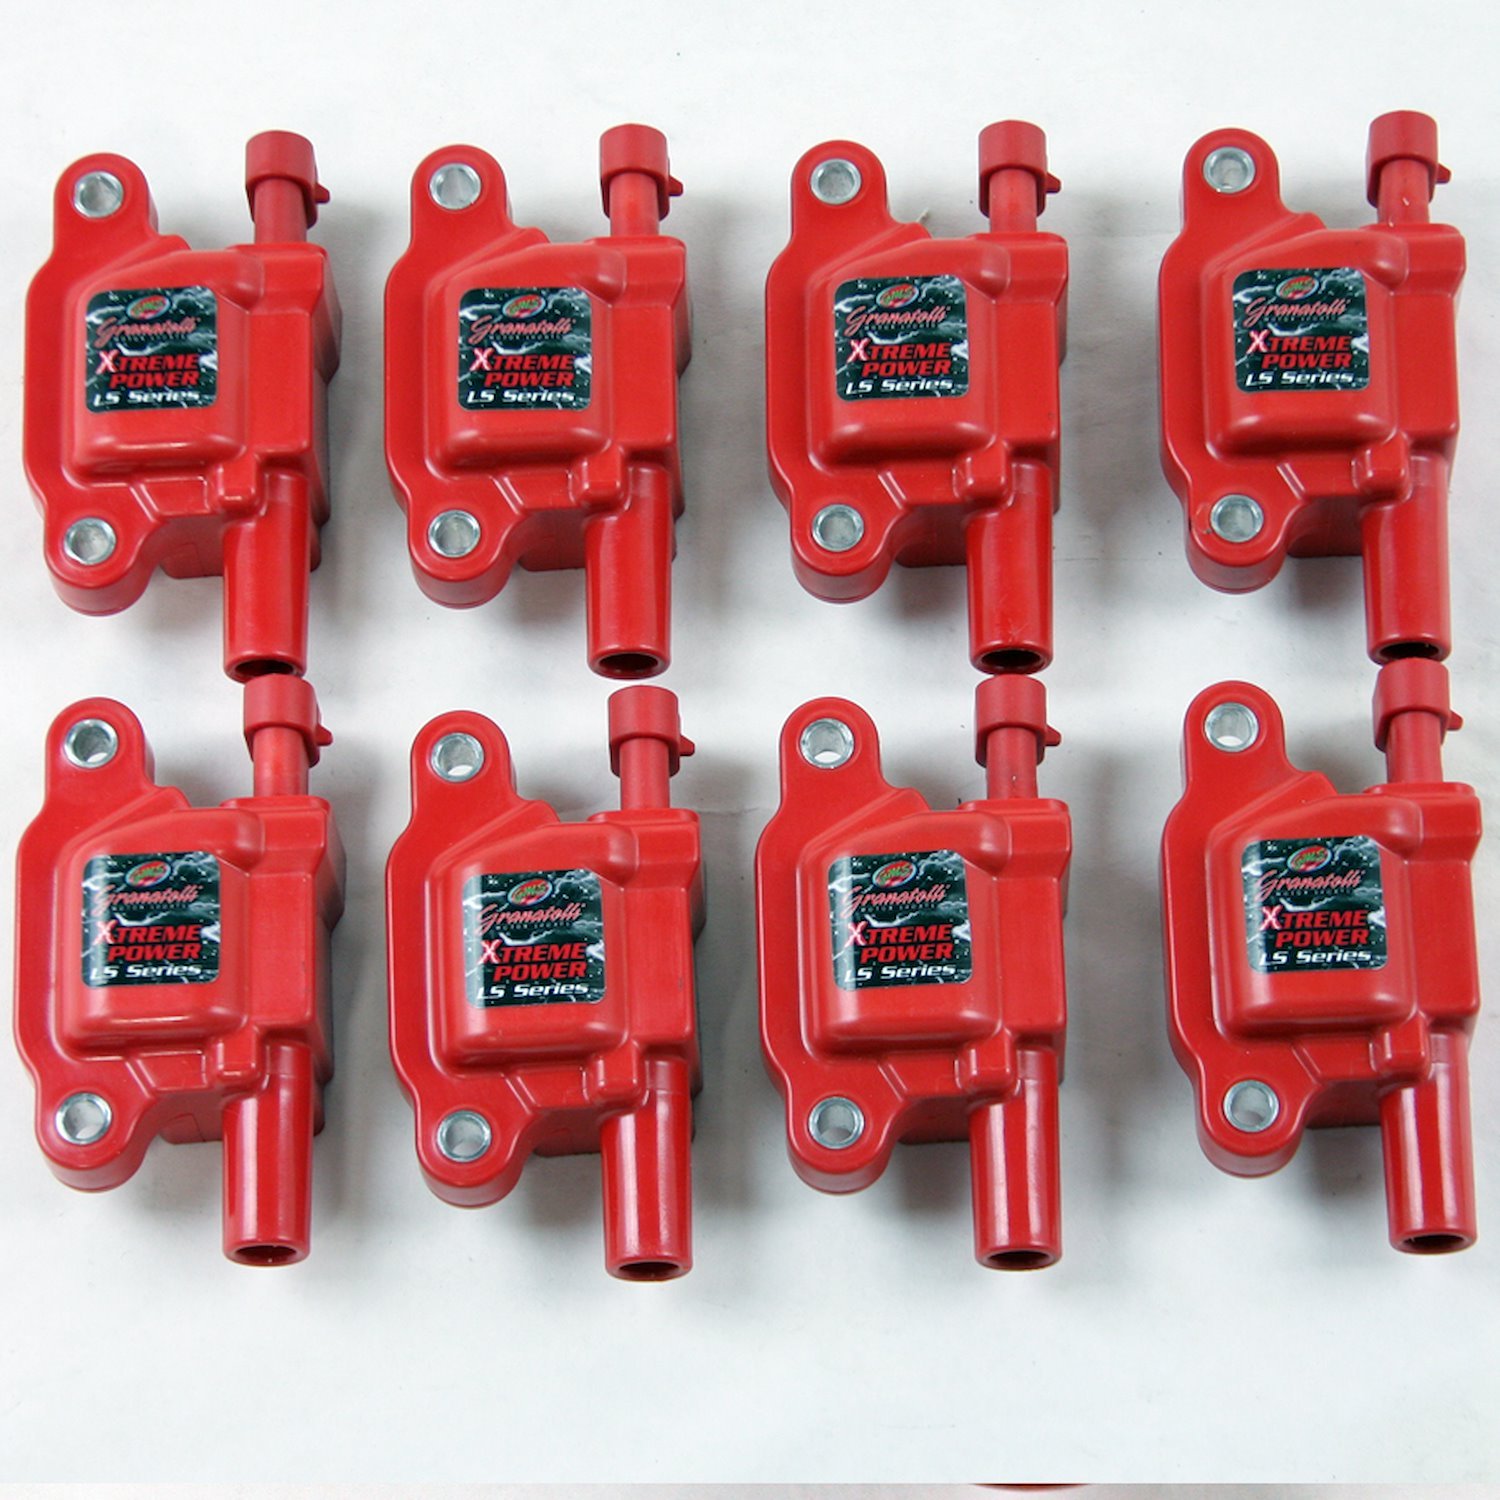 Pro Series Extreme Coil Packs